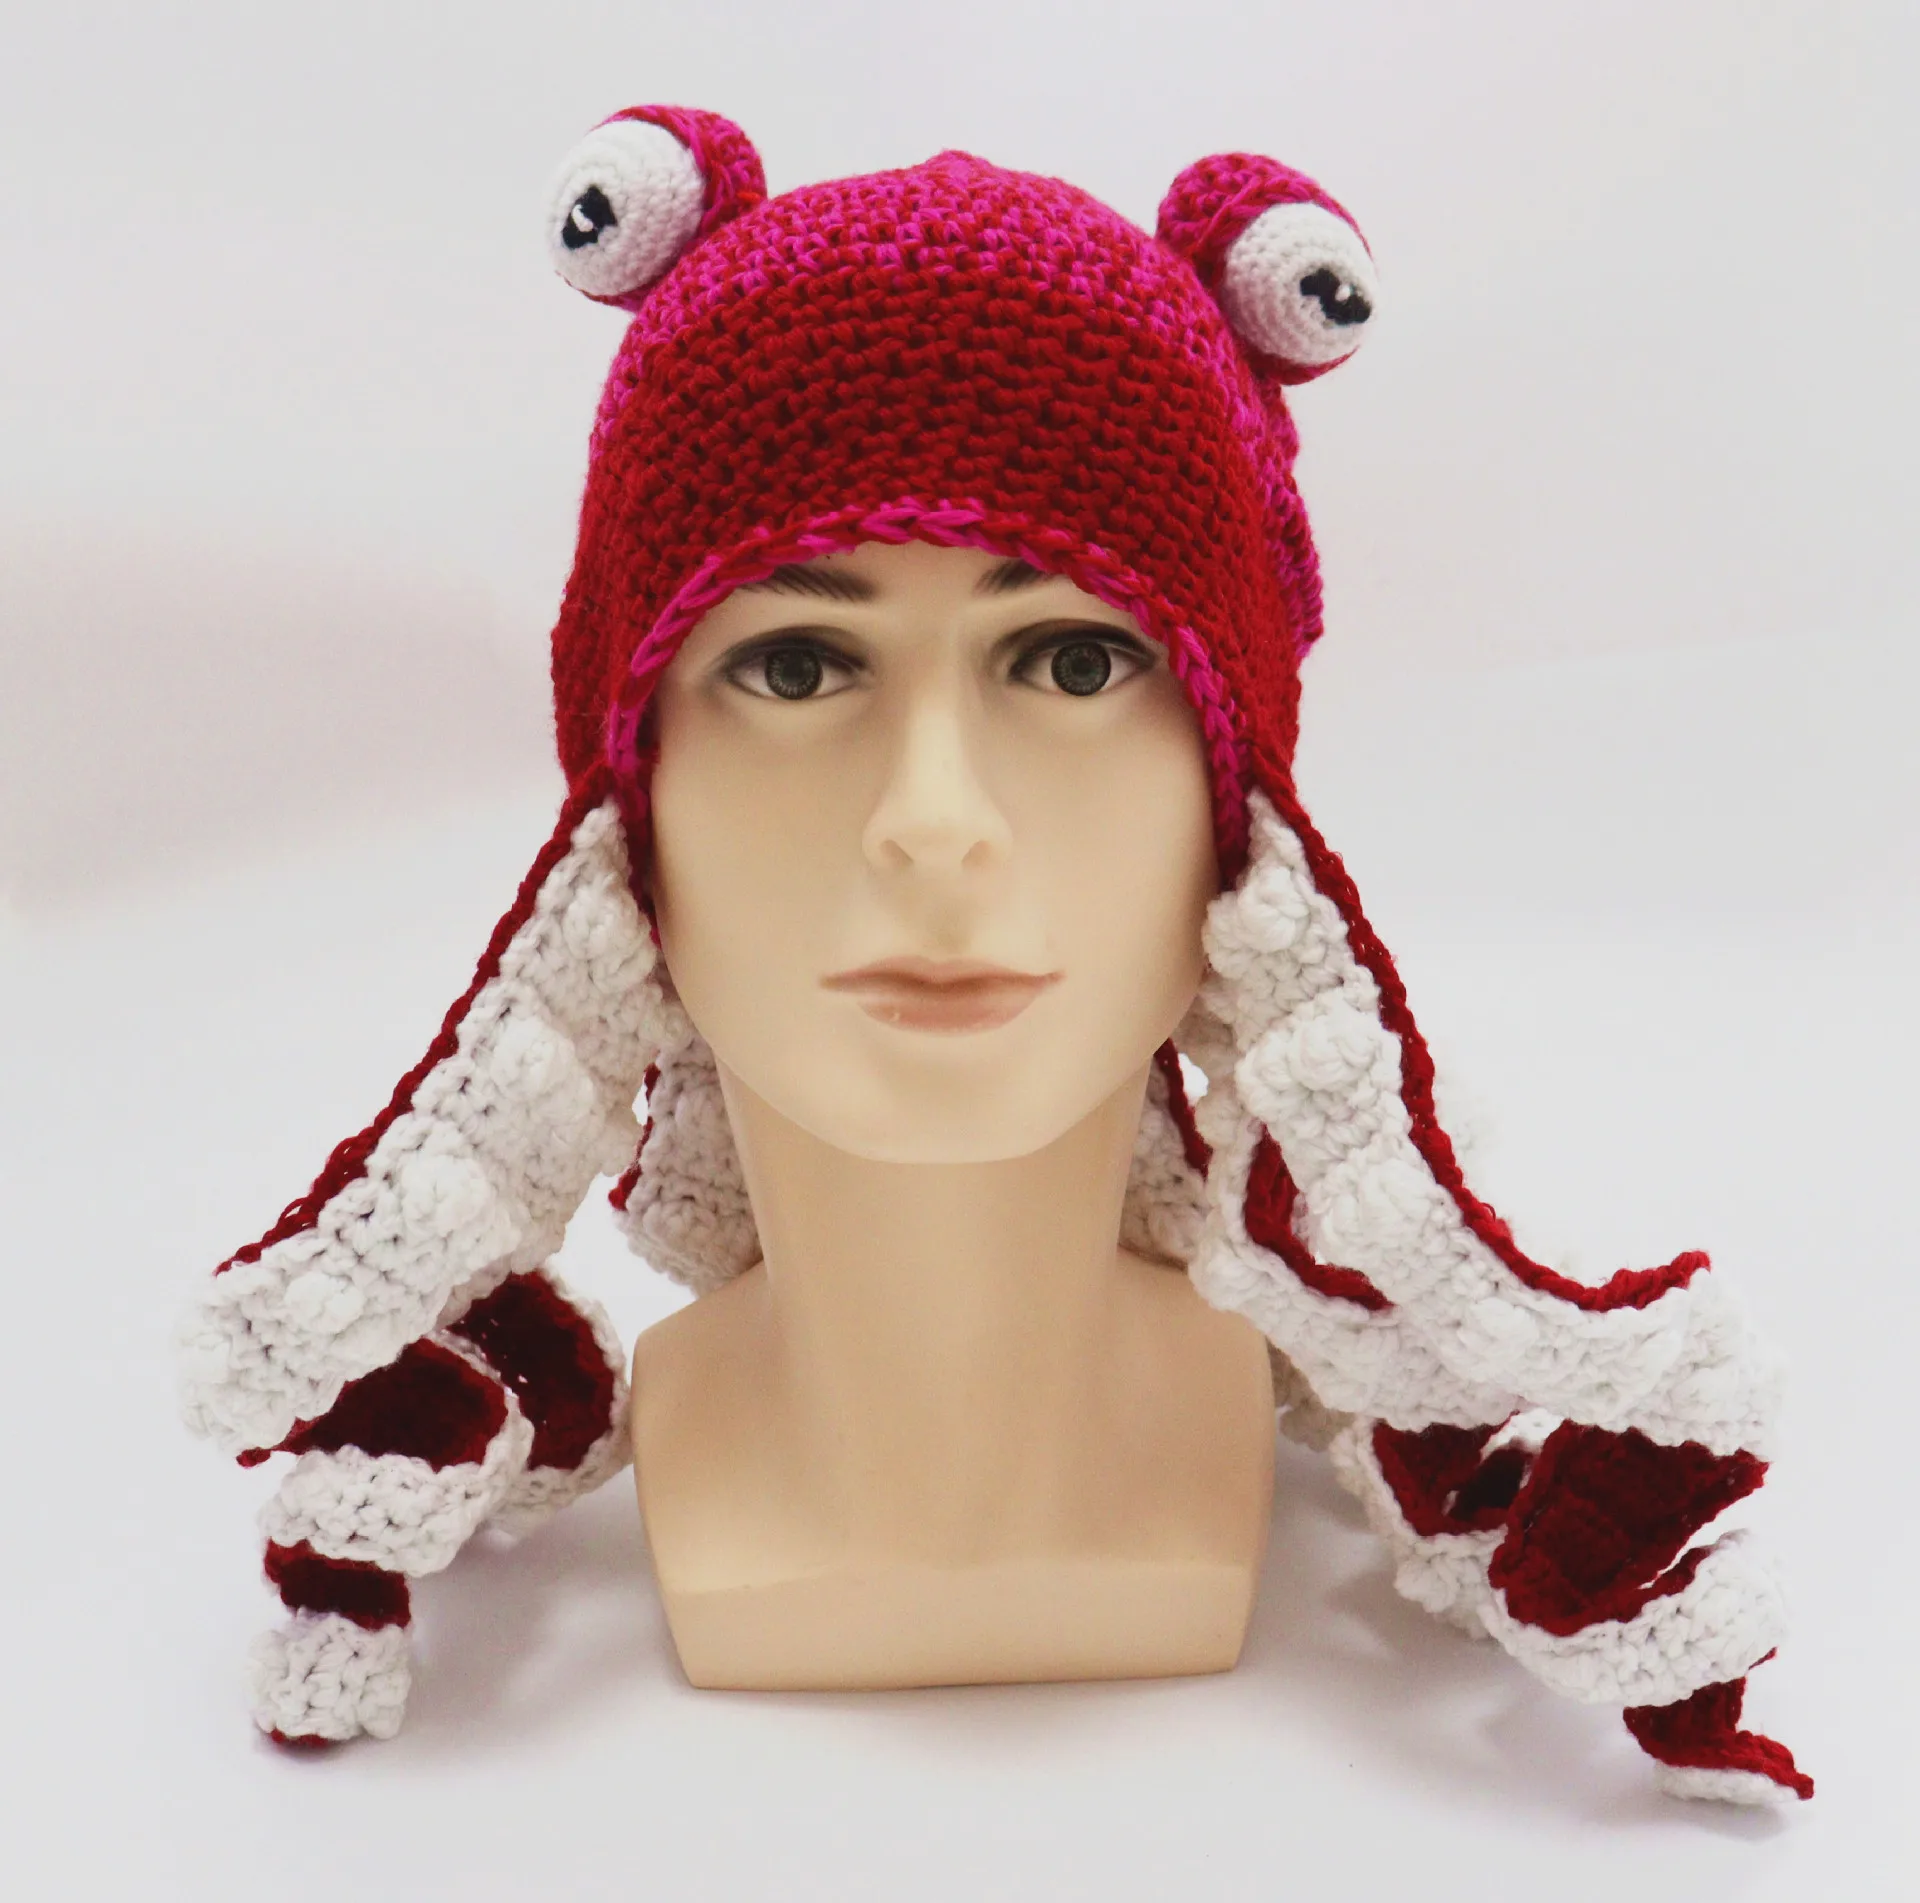 Fast Delivery Octopus Tentacle Hat Handwoven Knitted Octopus Hat,Party